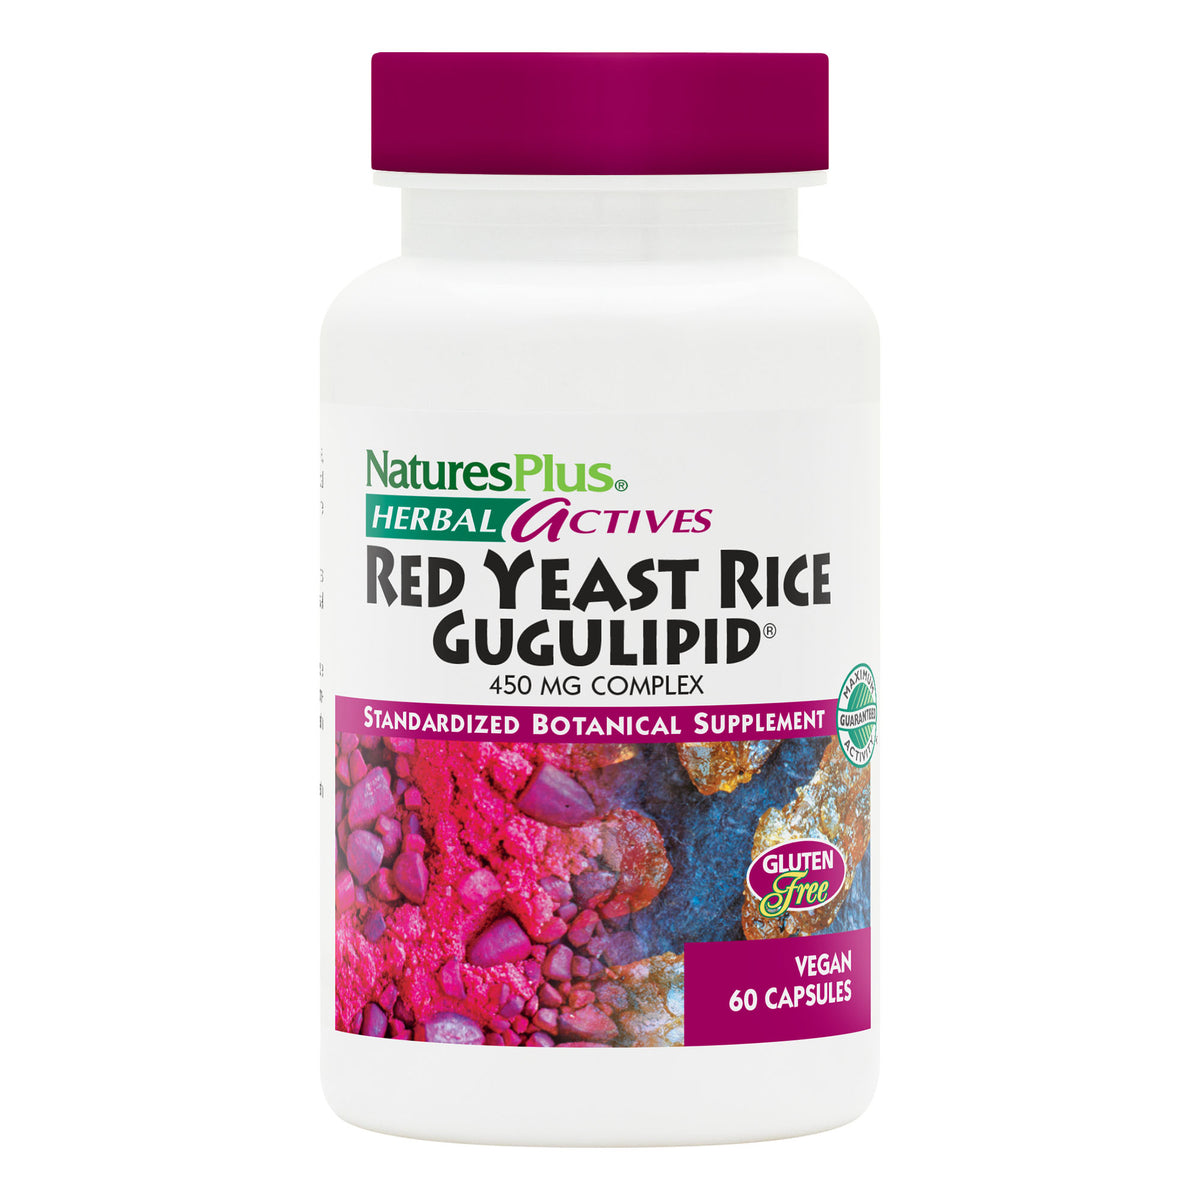 product image of Herbal Actives Red Yeast Rice/Gugulipid® Capsules containing 60 Count